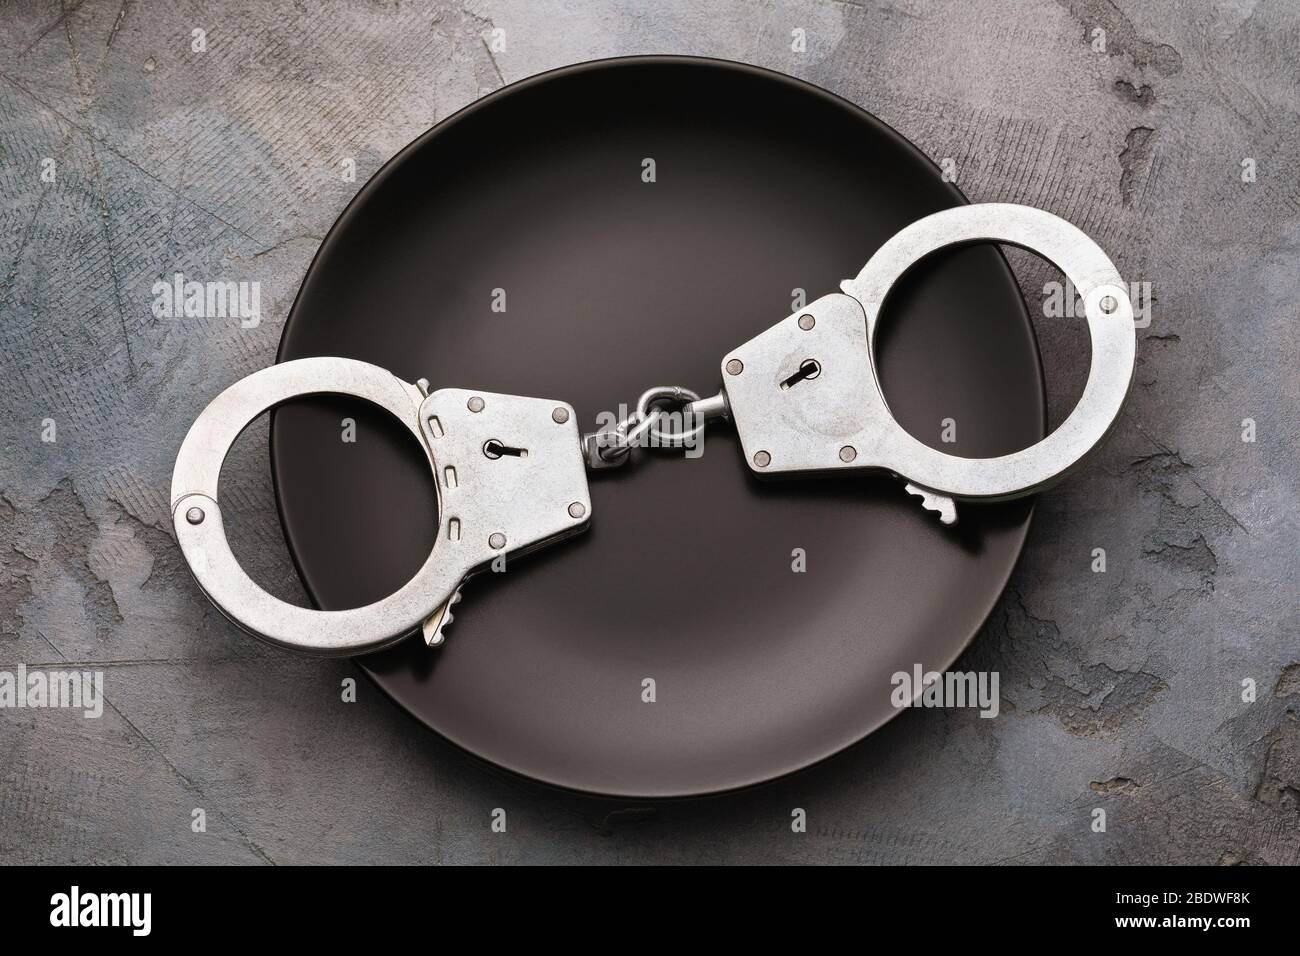 Handcuffs in a black plate, top view. Food Poison Punishment Concept Stock Photo